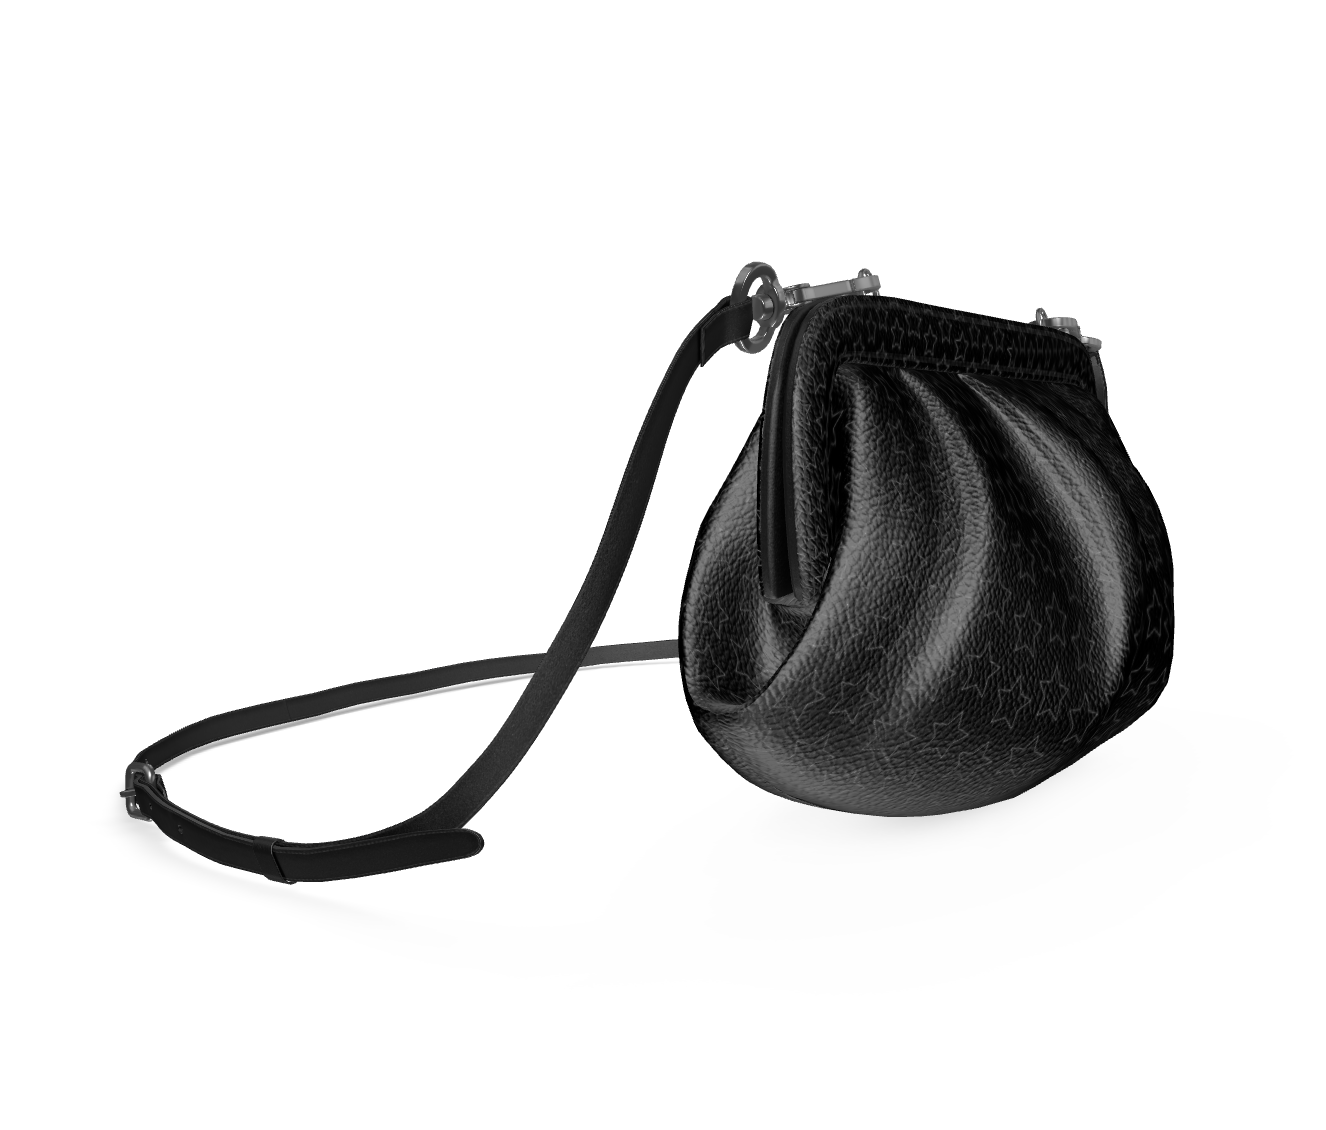 UNTITLED BOUTIQUE Black Leather Stars Pleated Bag - Limited Edition